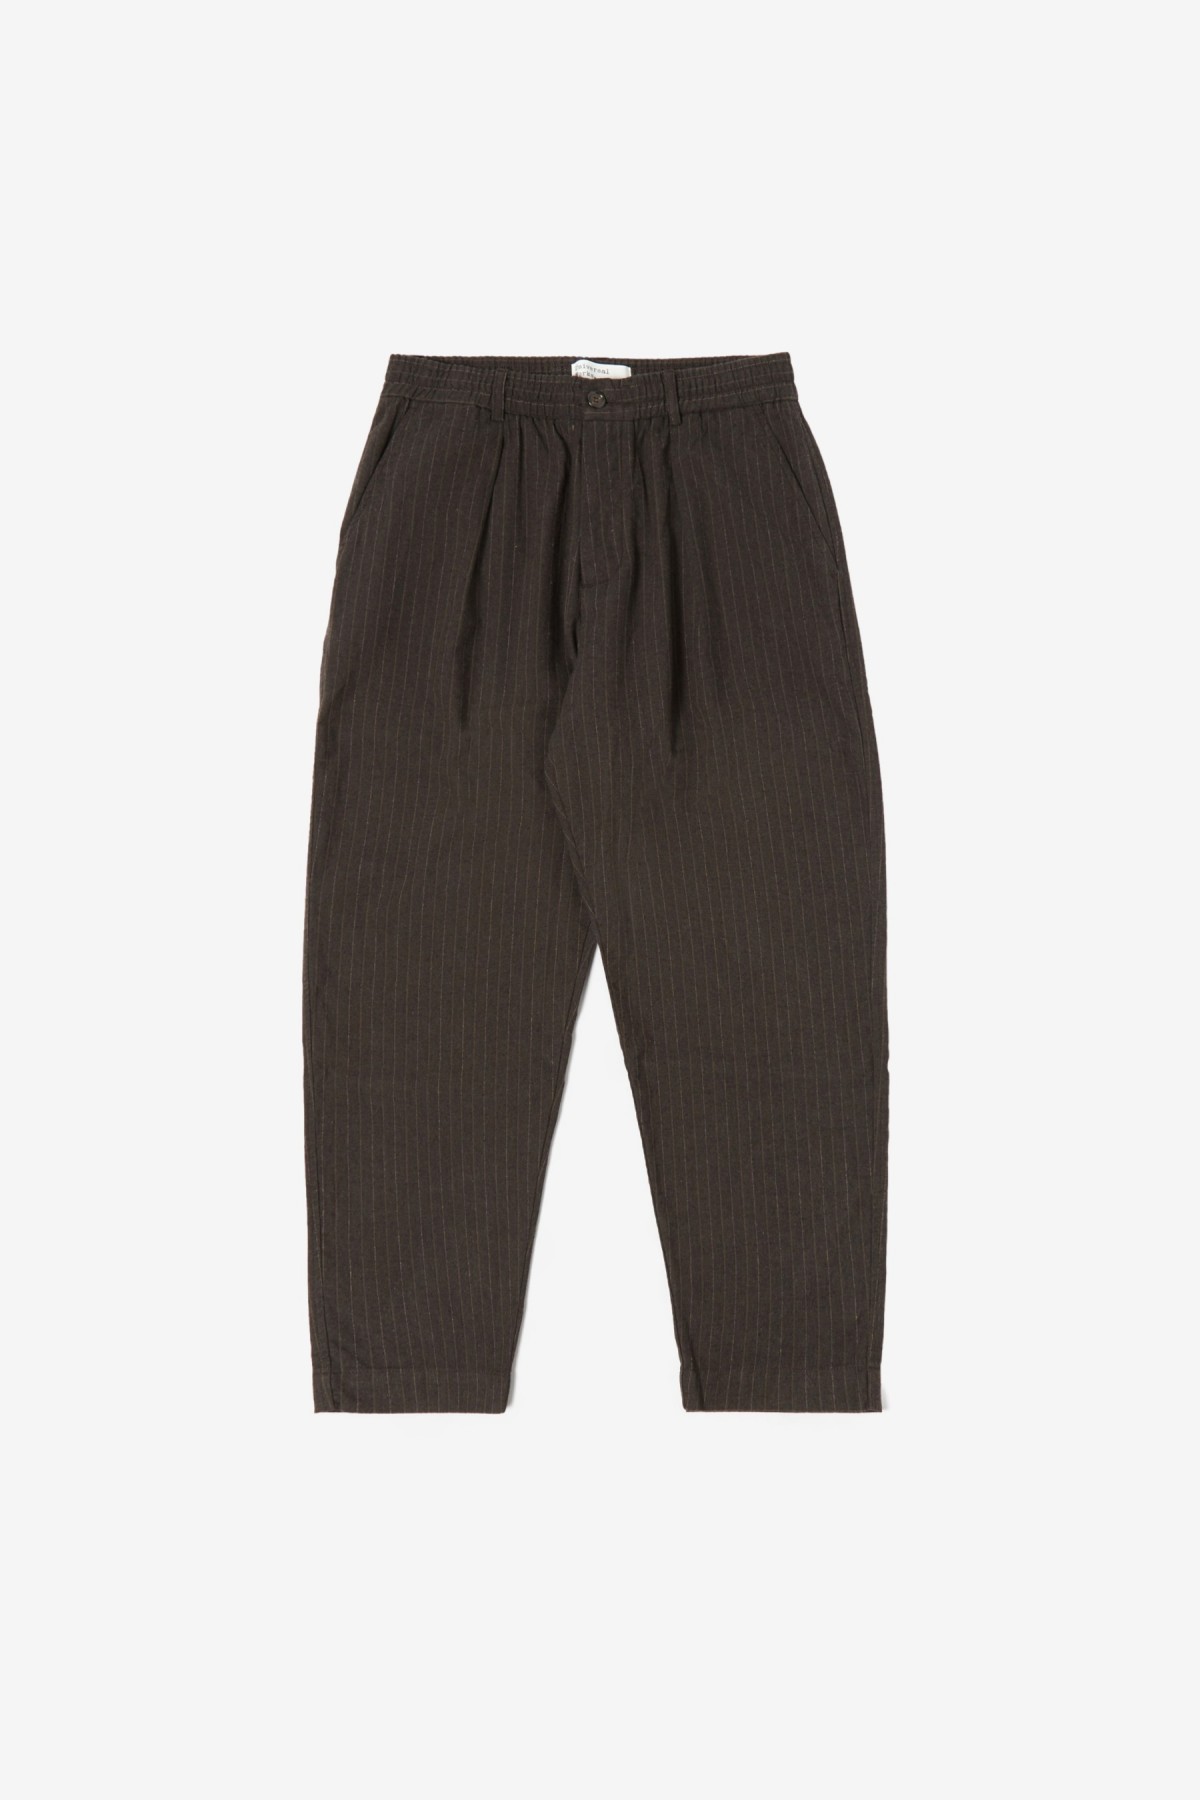 Universal Works Pleated Track Pant in Brown